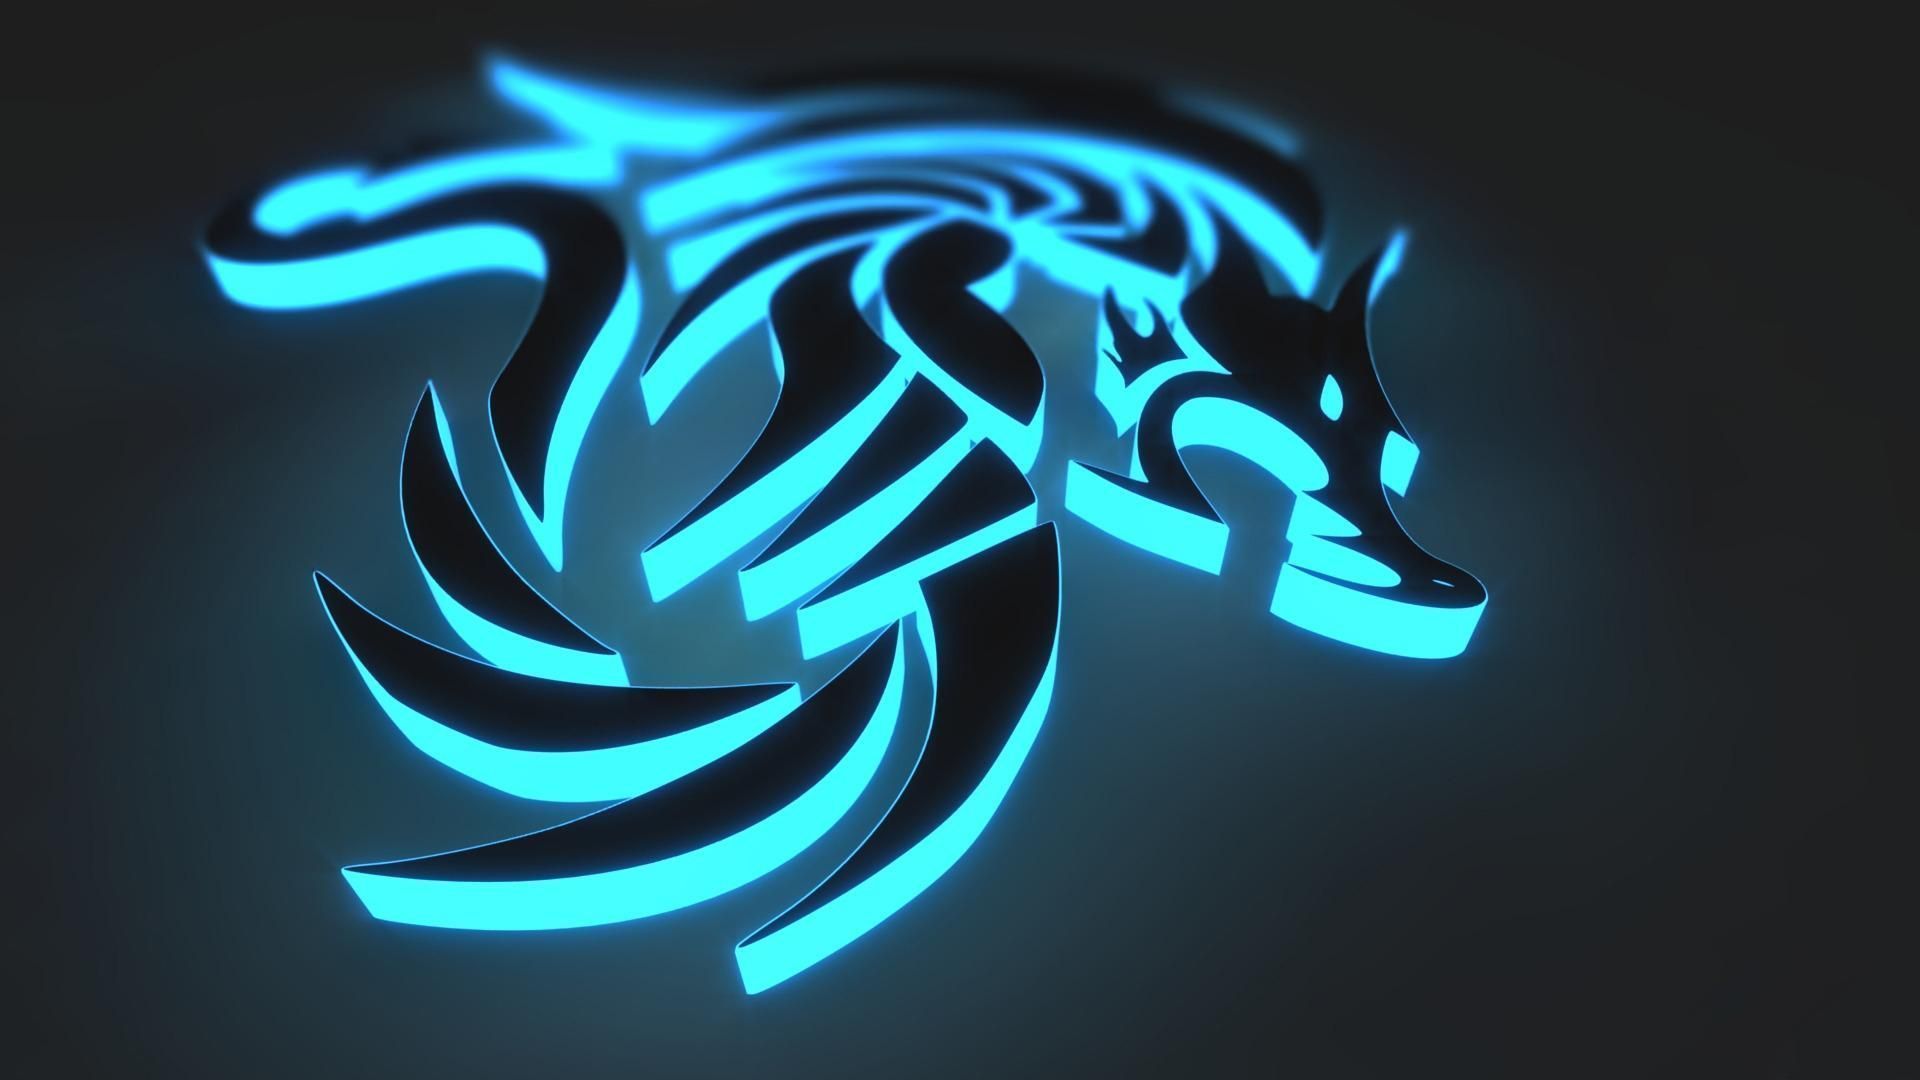 Blue Dragon Wallpaper Background Images HD Wallpapers Range